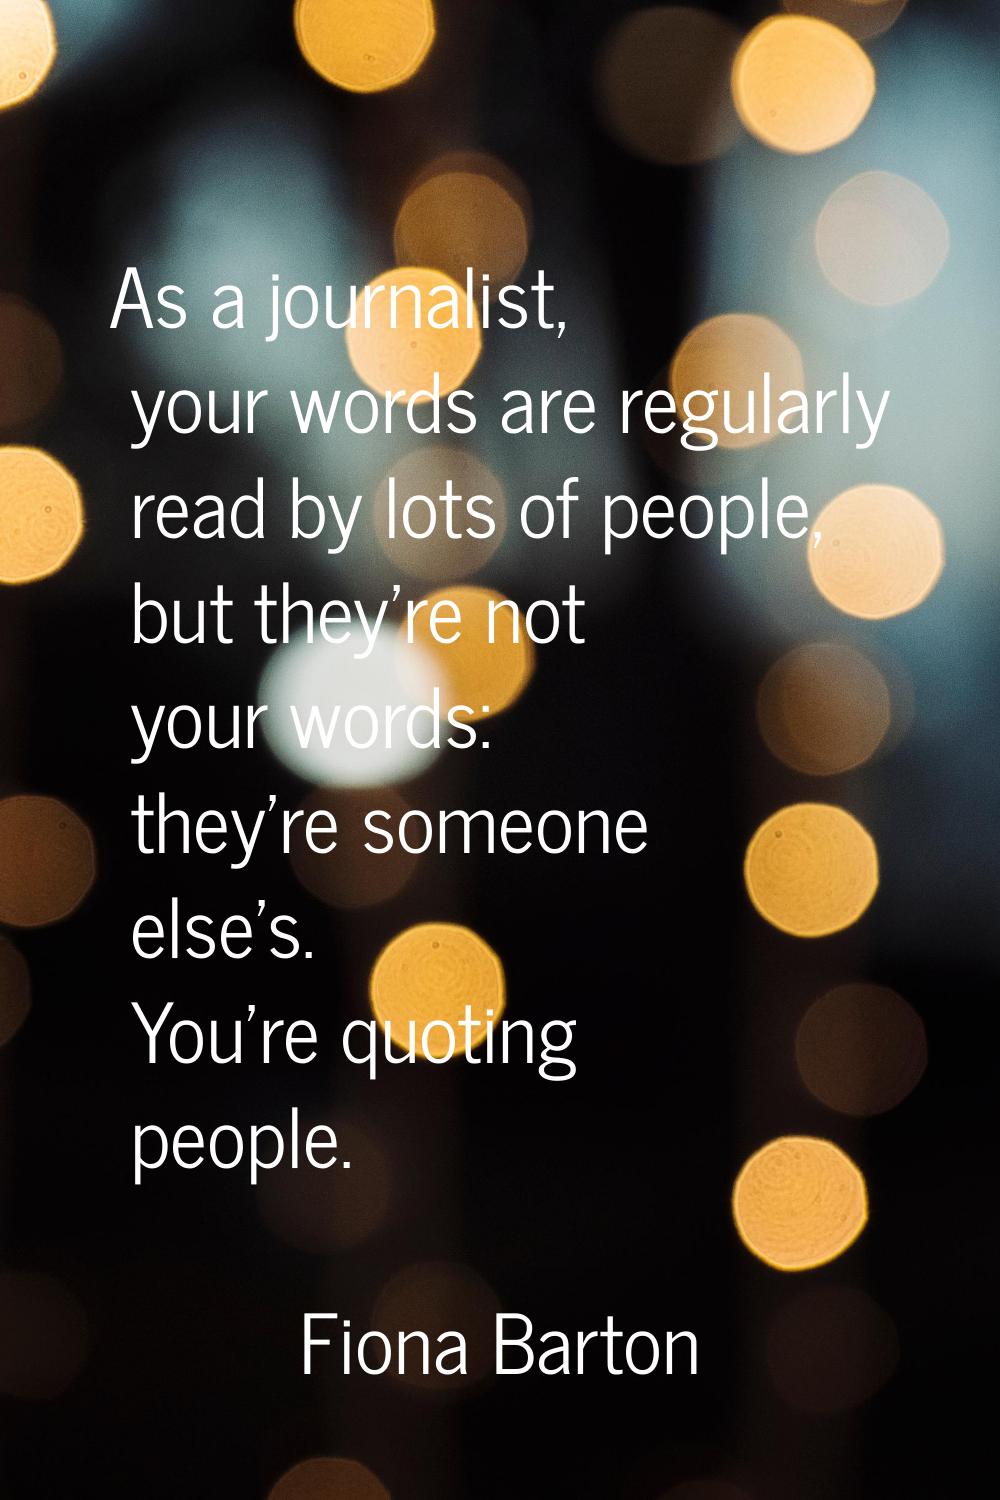 As a journalist, your words are regularly read by lots of people, but they're not your words: they'